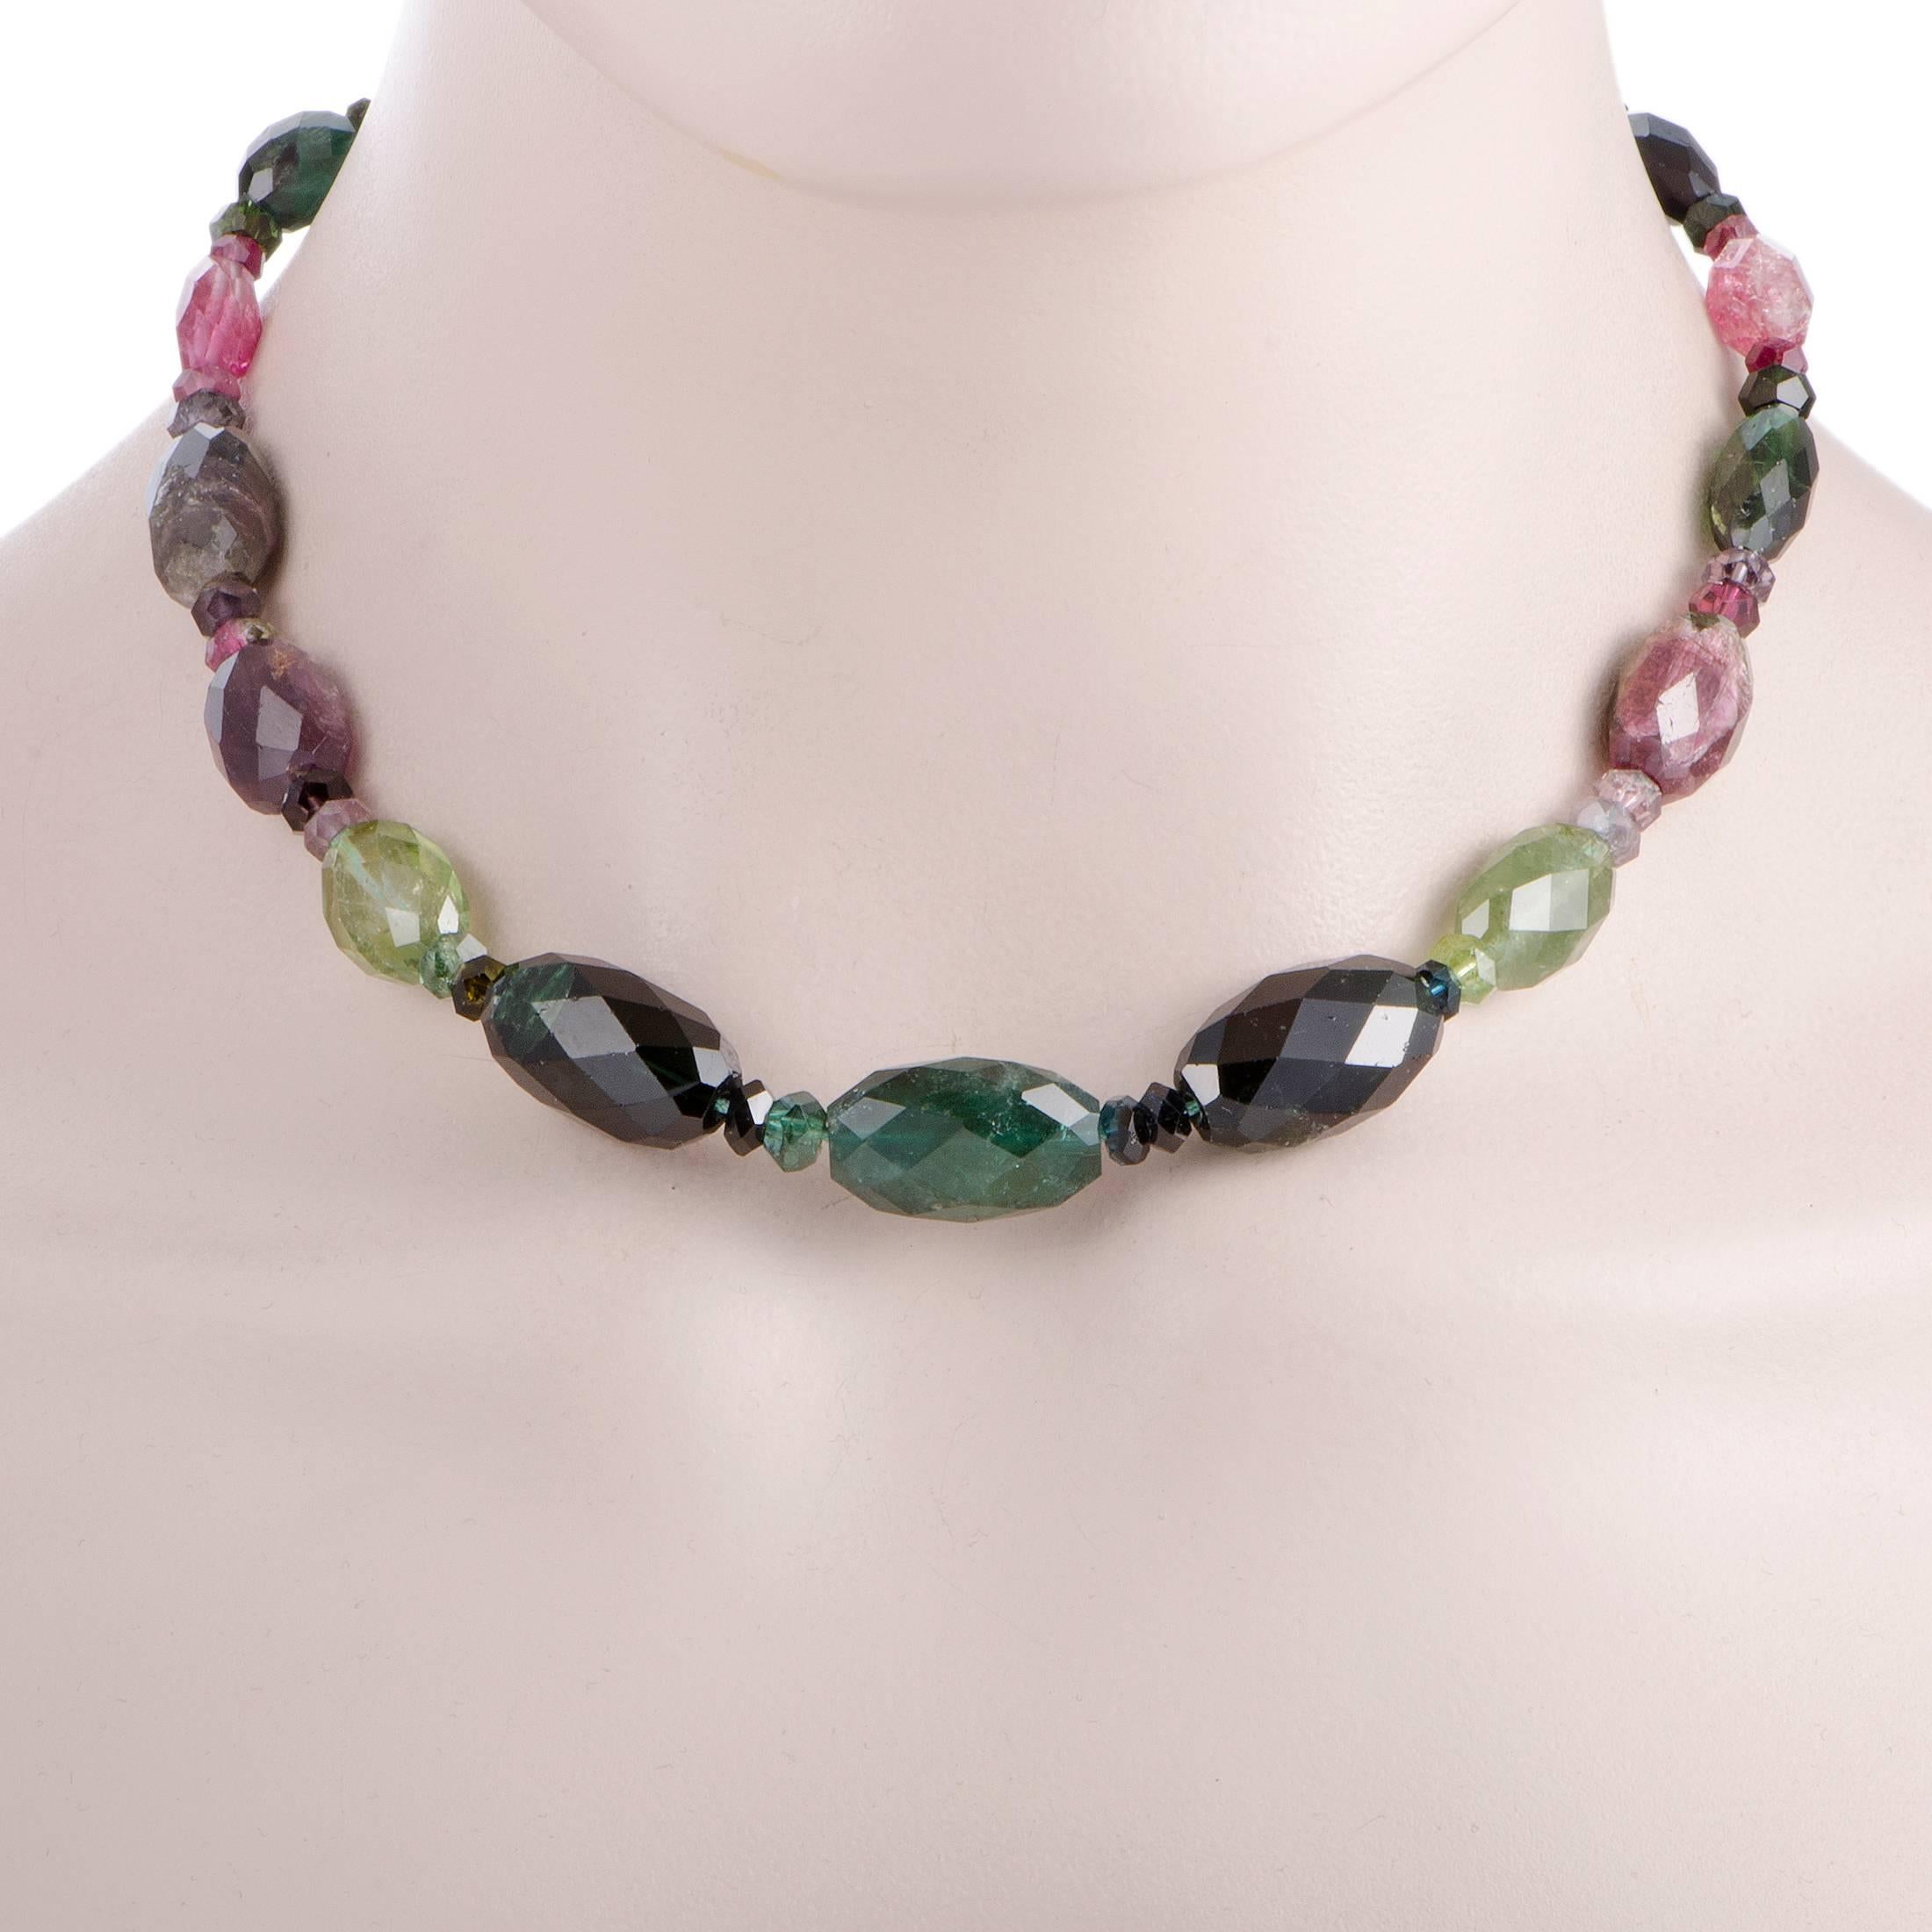 Lending their irresistible allure to the necklace, the colorful gemstones give a compellingly fashionable appeal to this exceptional jewelry piece. The necklace is made of 18K yellow gold and it is embellished with multi-colored tourmaline bead.